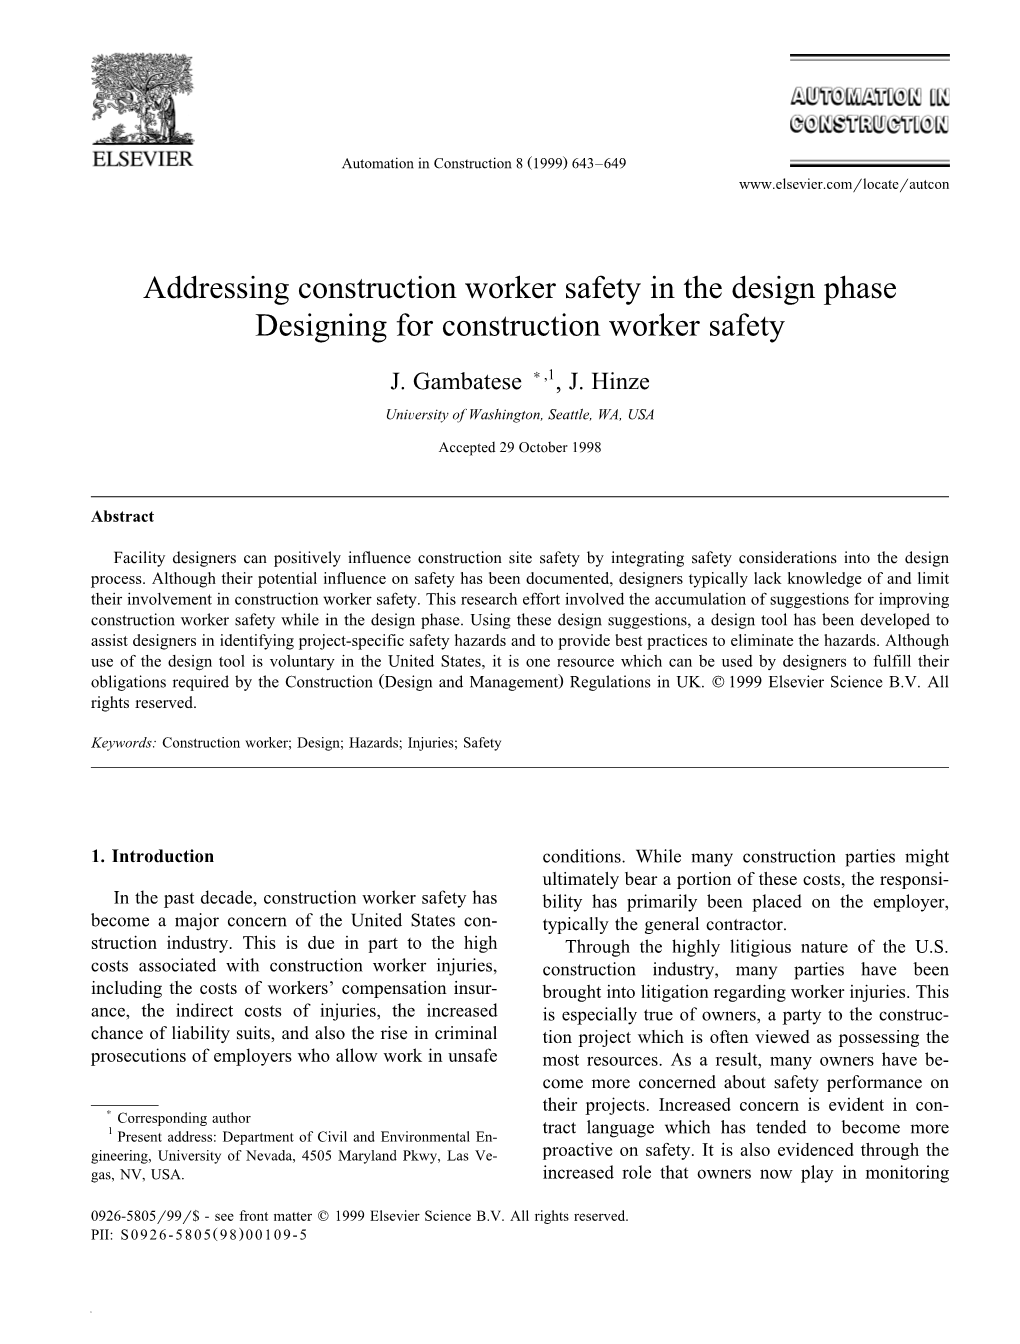 Addressing Construction Worker Safety in the Design Phase Designing for Construction Worker Safety